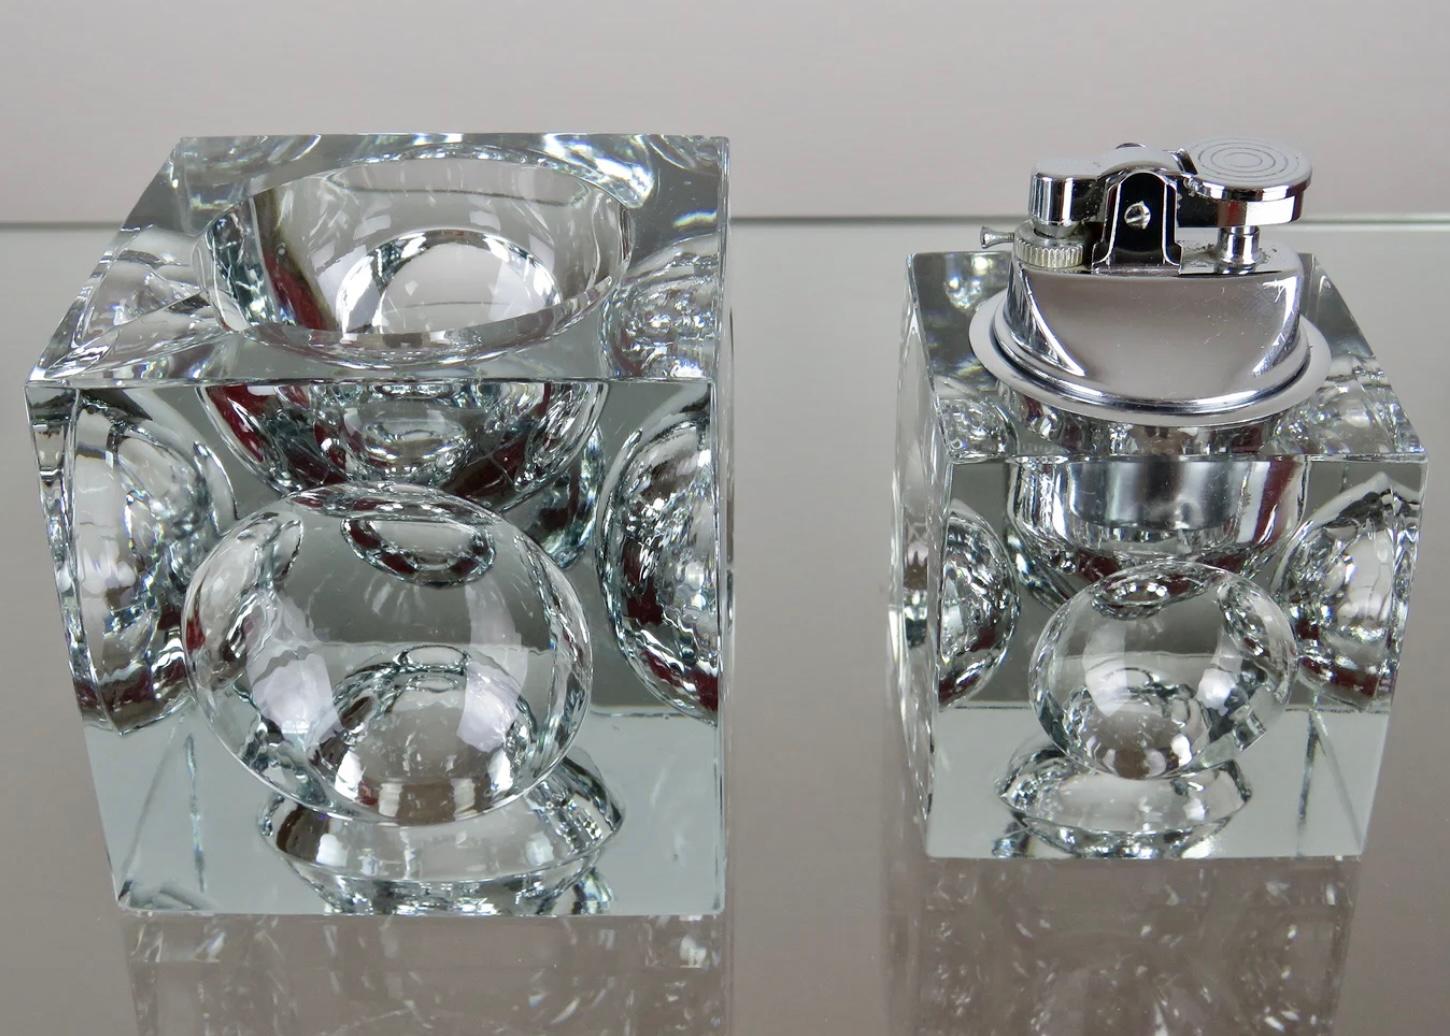 1970s heavy glass block Murano clear glass table lighter-paperweight with chrome top and matching ashtray. Cut out circular discs are cut out on each side. A dramatic accent to any modern living room decor, this Murano lighter will elevate any